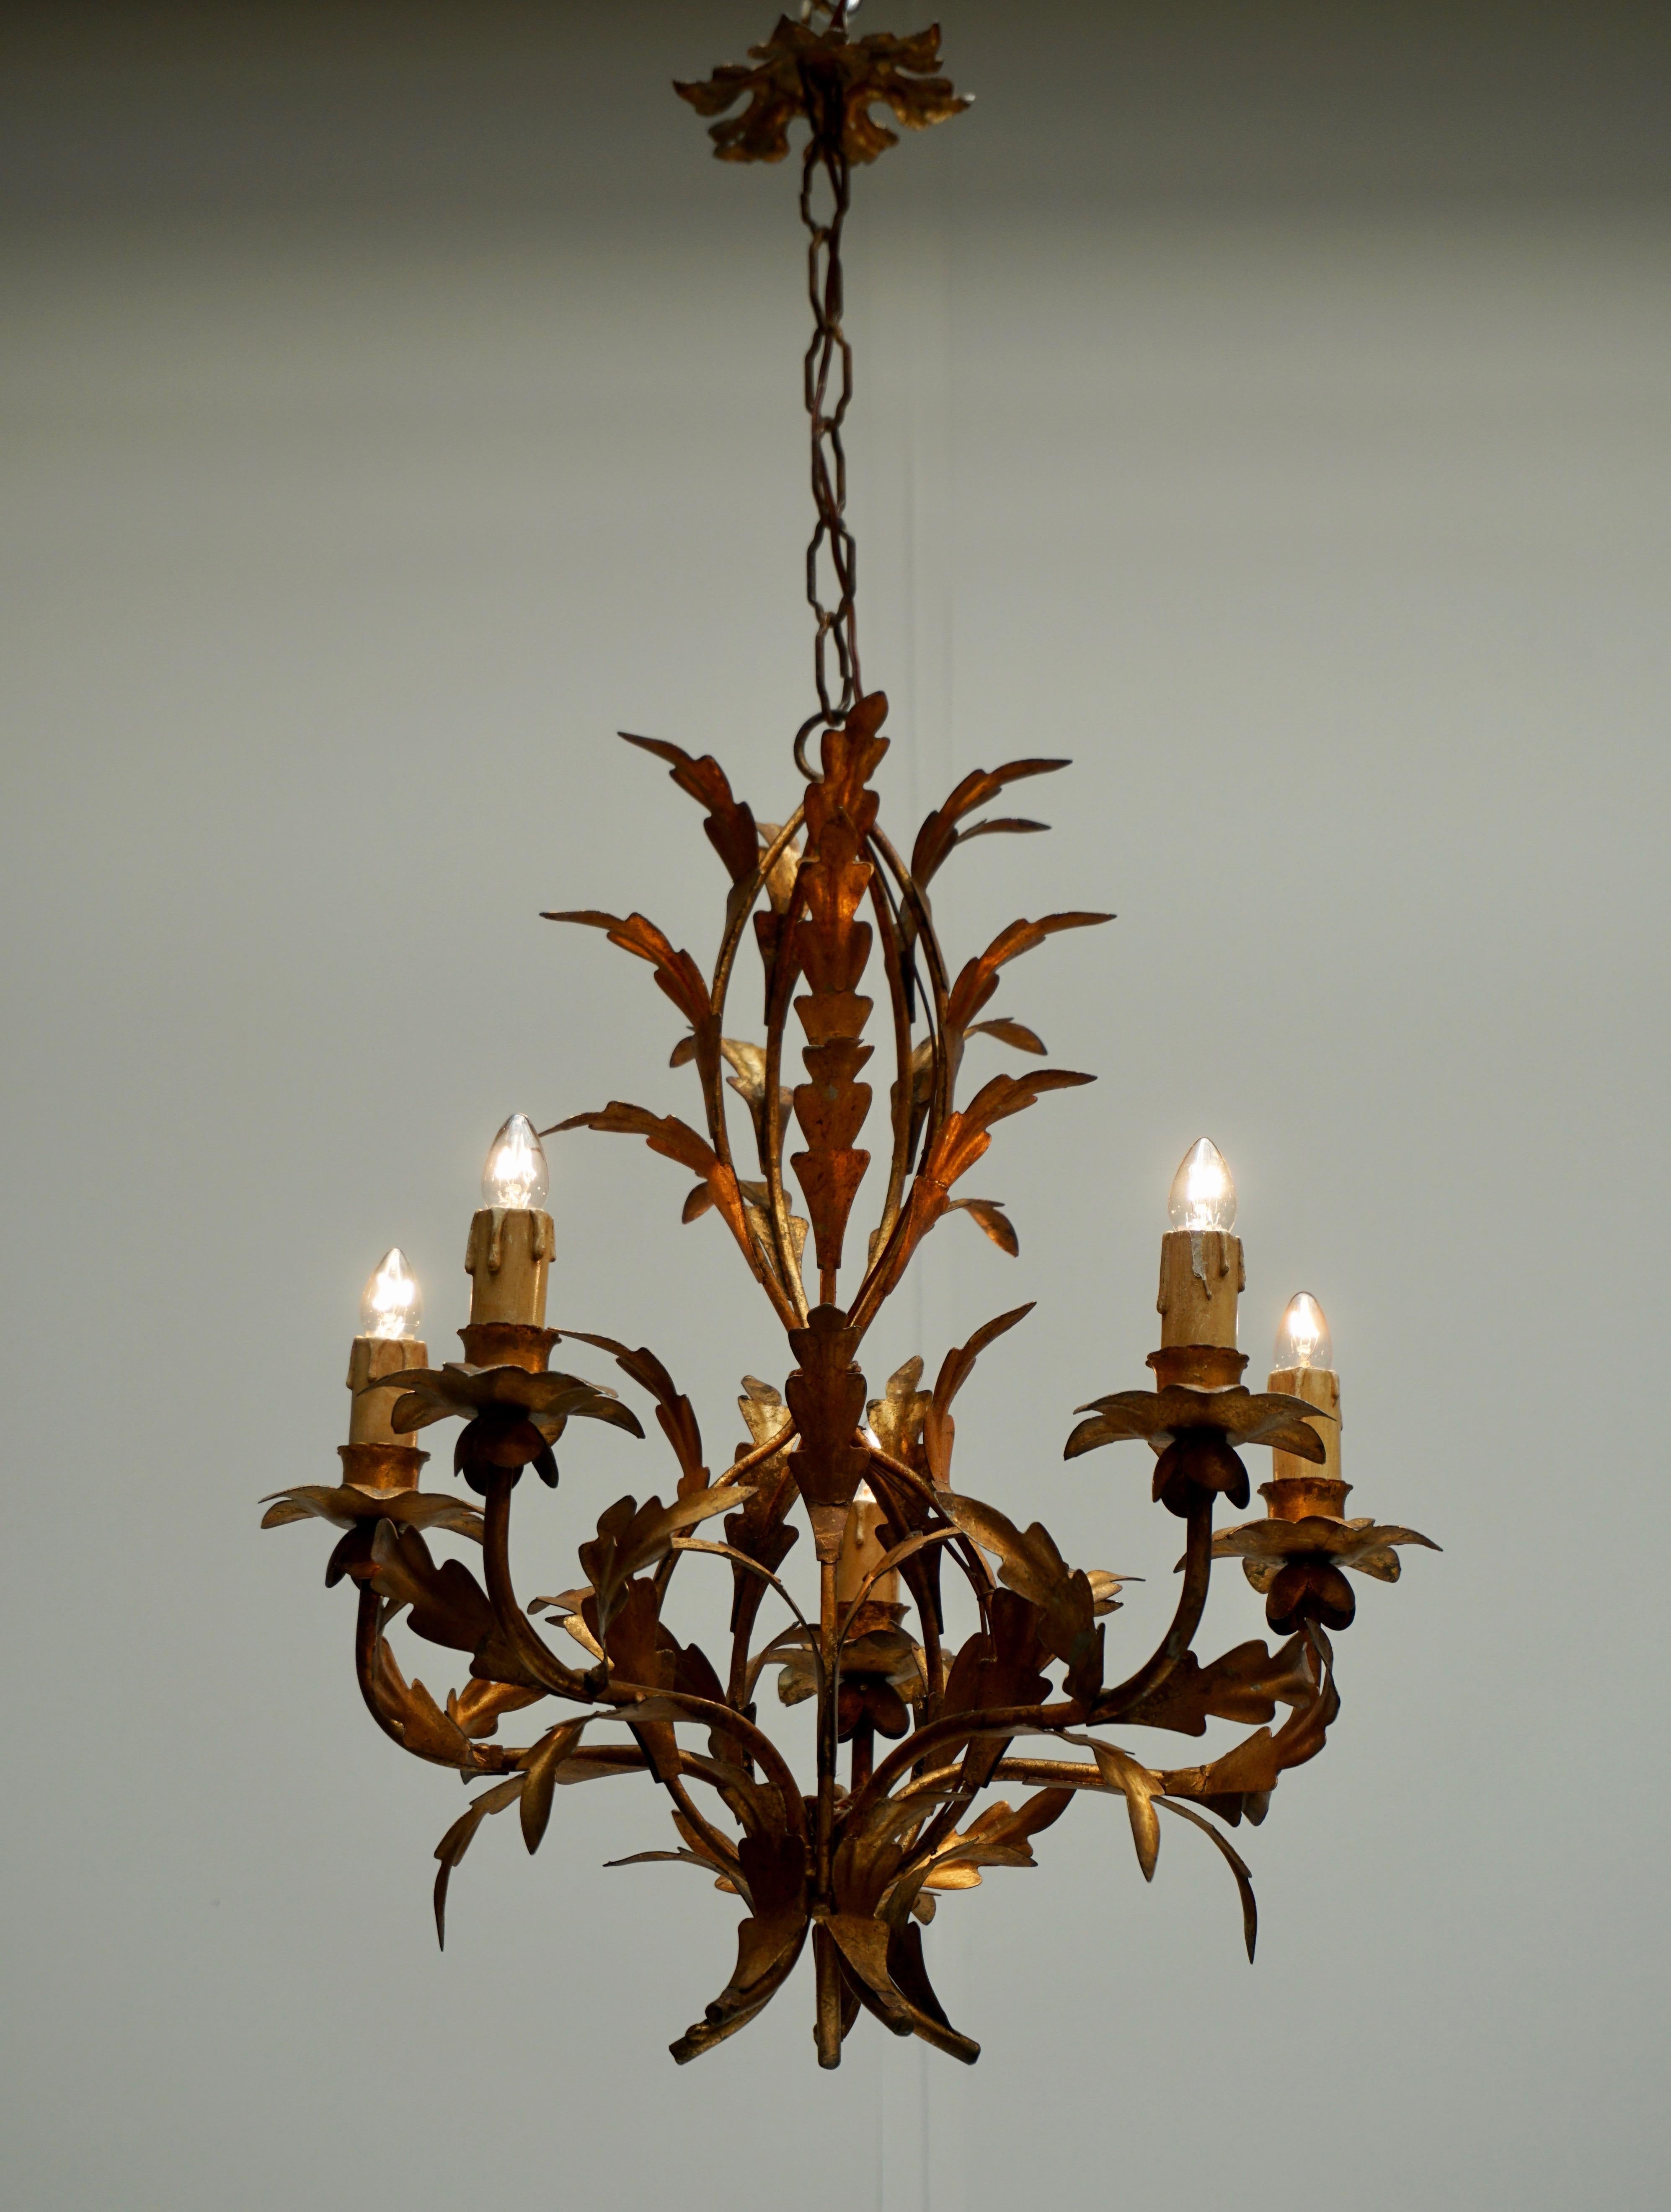 A fabulous vintage French tôle chandelier of gilded iron in the form of a lavish bouquet of lilies and leaves and stems from France circa 1940 with ten lights. This gorgeous chandelier is modeled after the famous fixtures created of painted metal